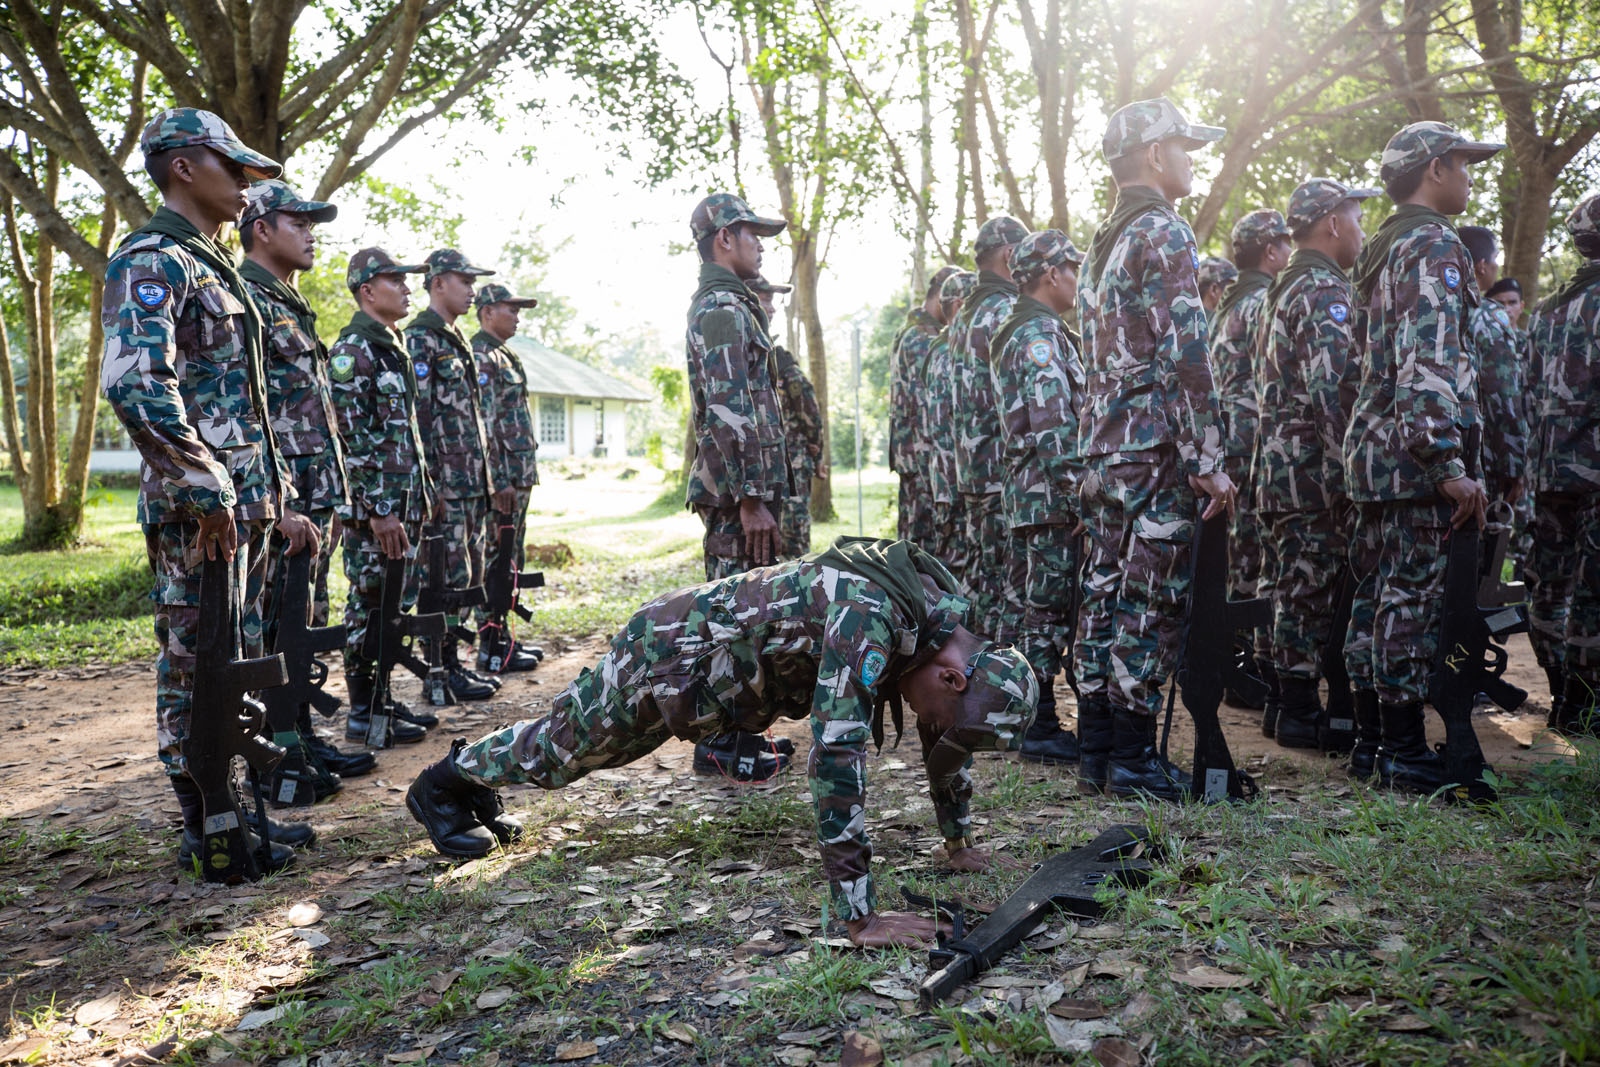 THAILAND'S FOREST RANGERS - New forest ranger recruits are ordered to do pushups...